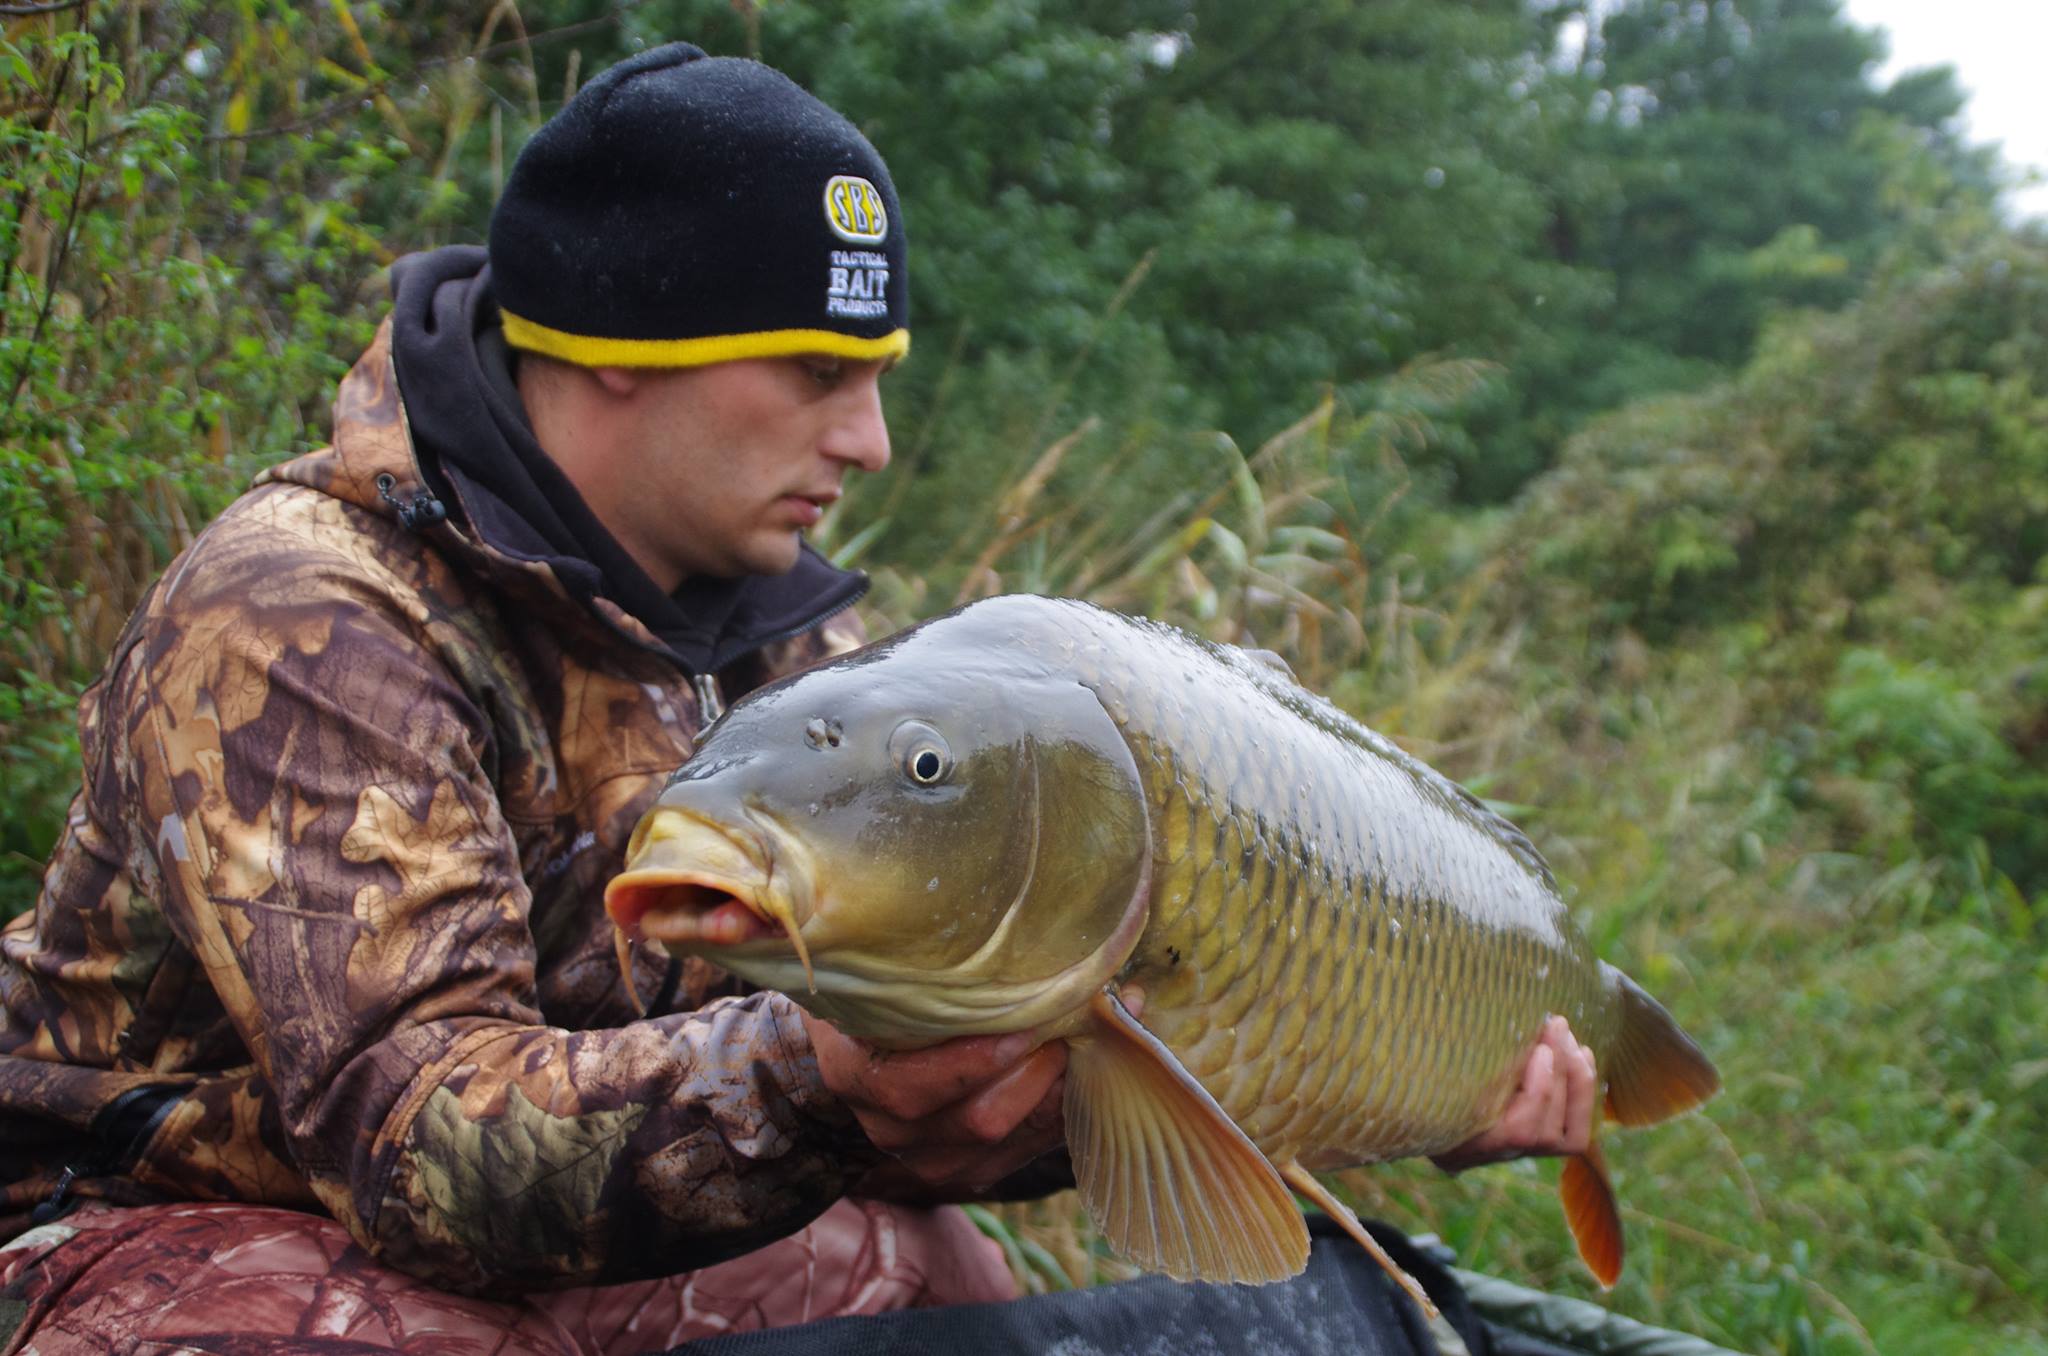 This 11 kg carp could not resist the Garlic flavoured boilie, either